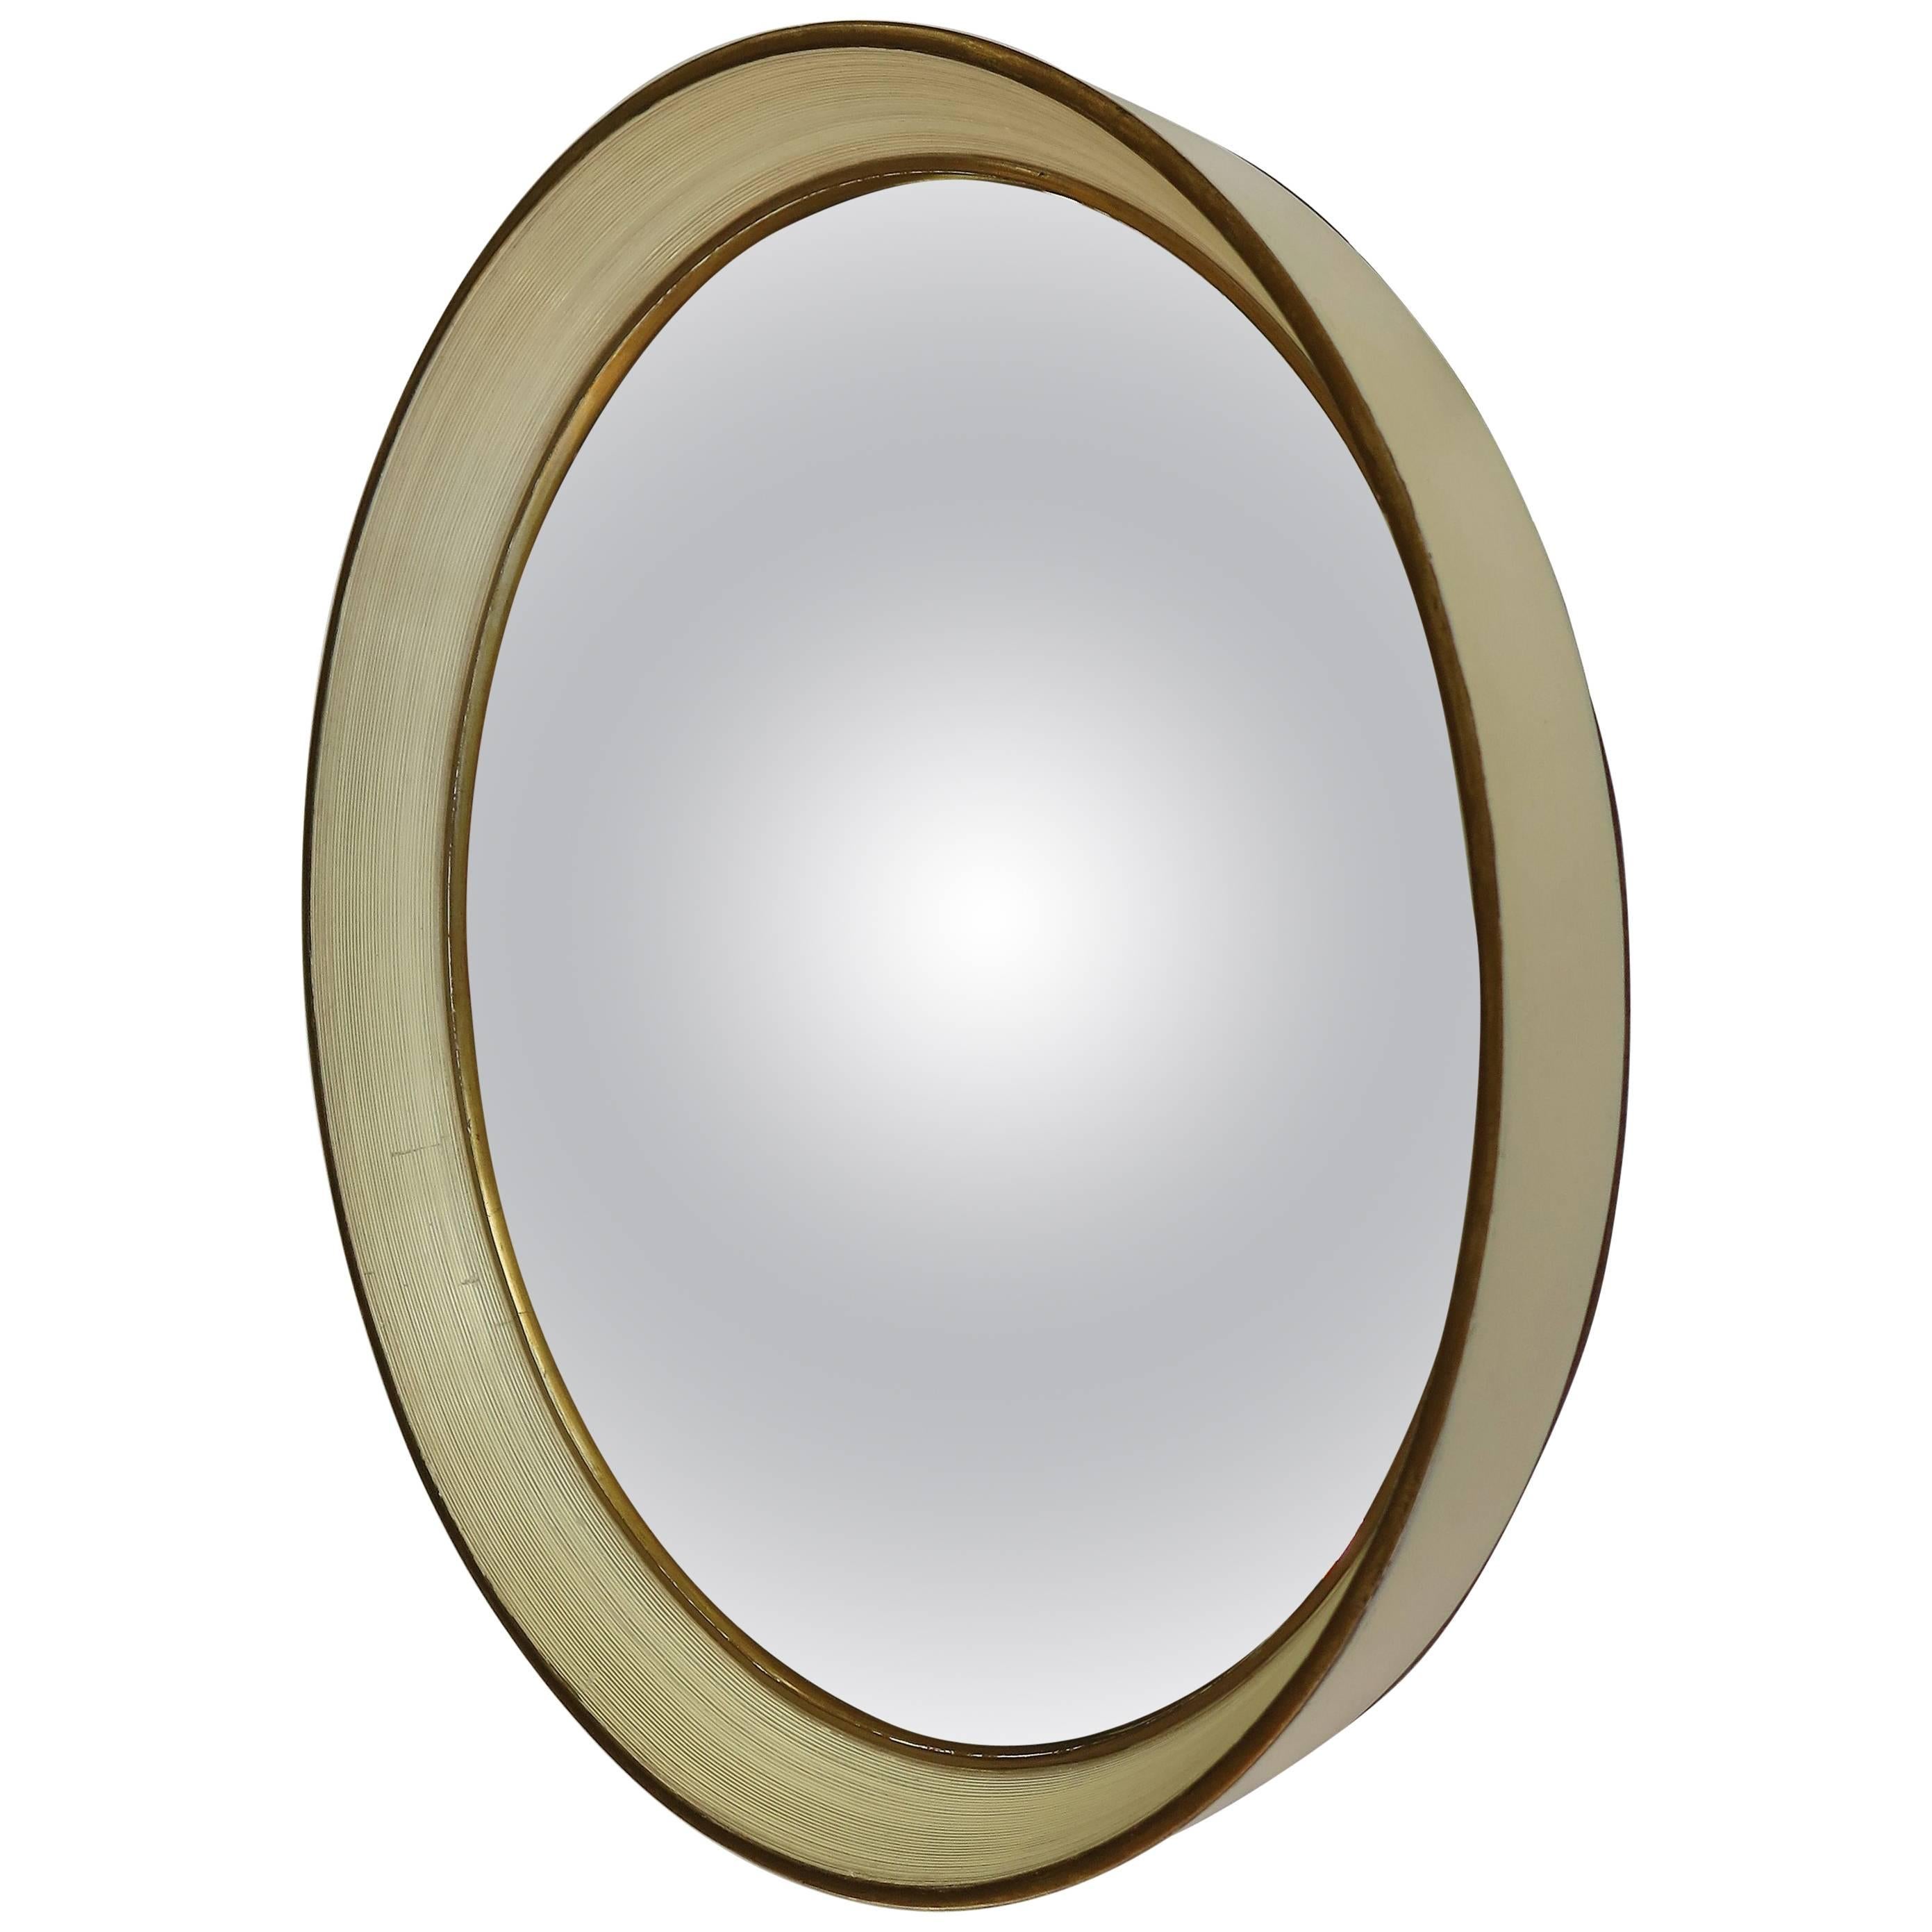 Round Convex Wall Mirror Turned Cream Wood Frame with Gilt Detail, Ca. 1925